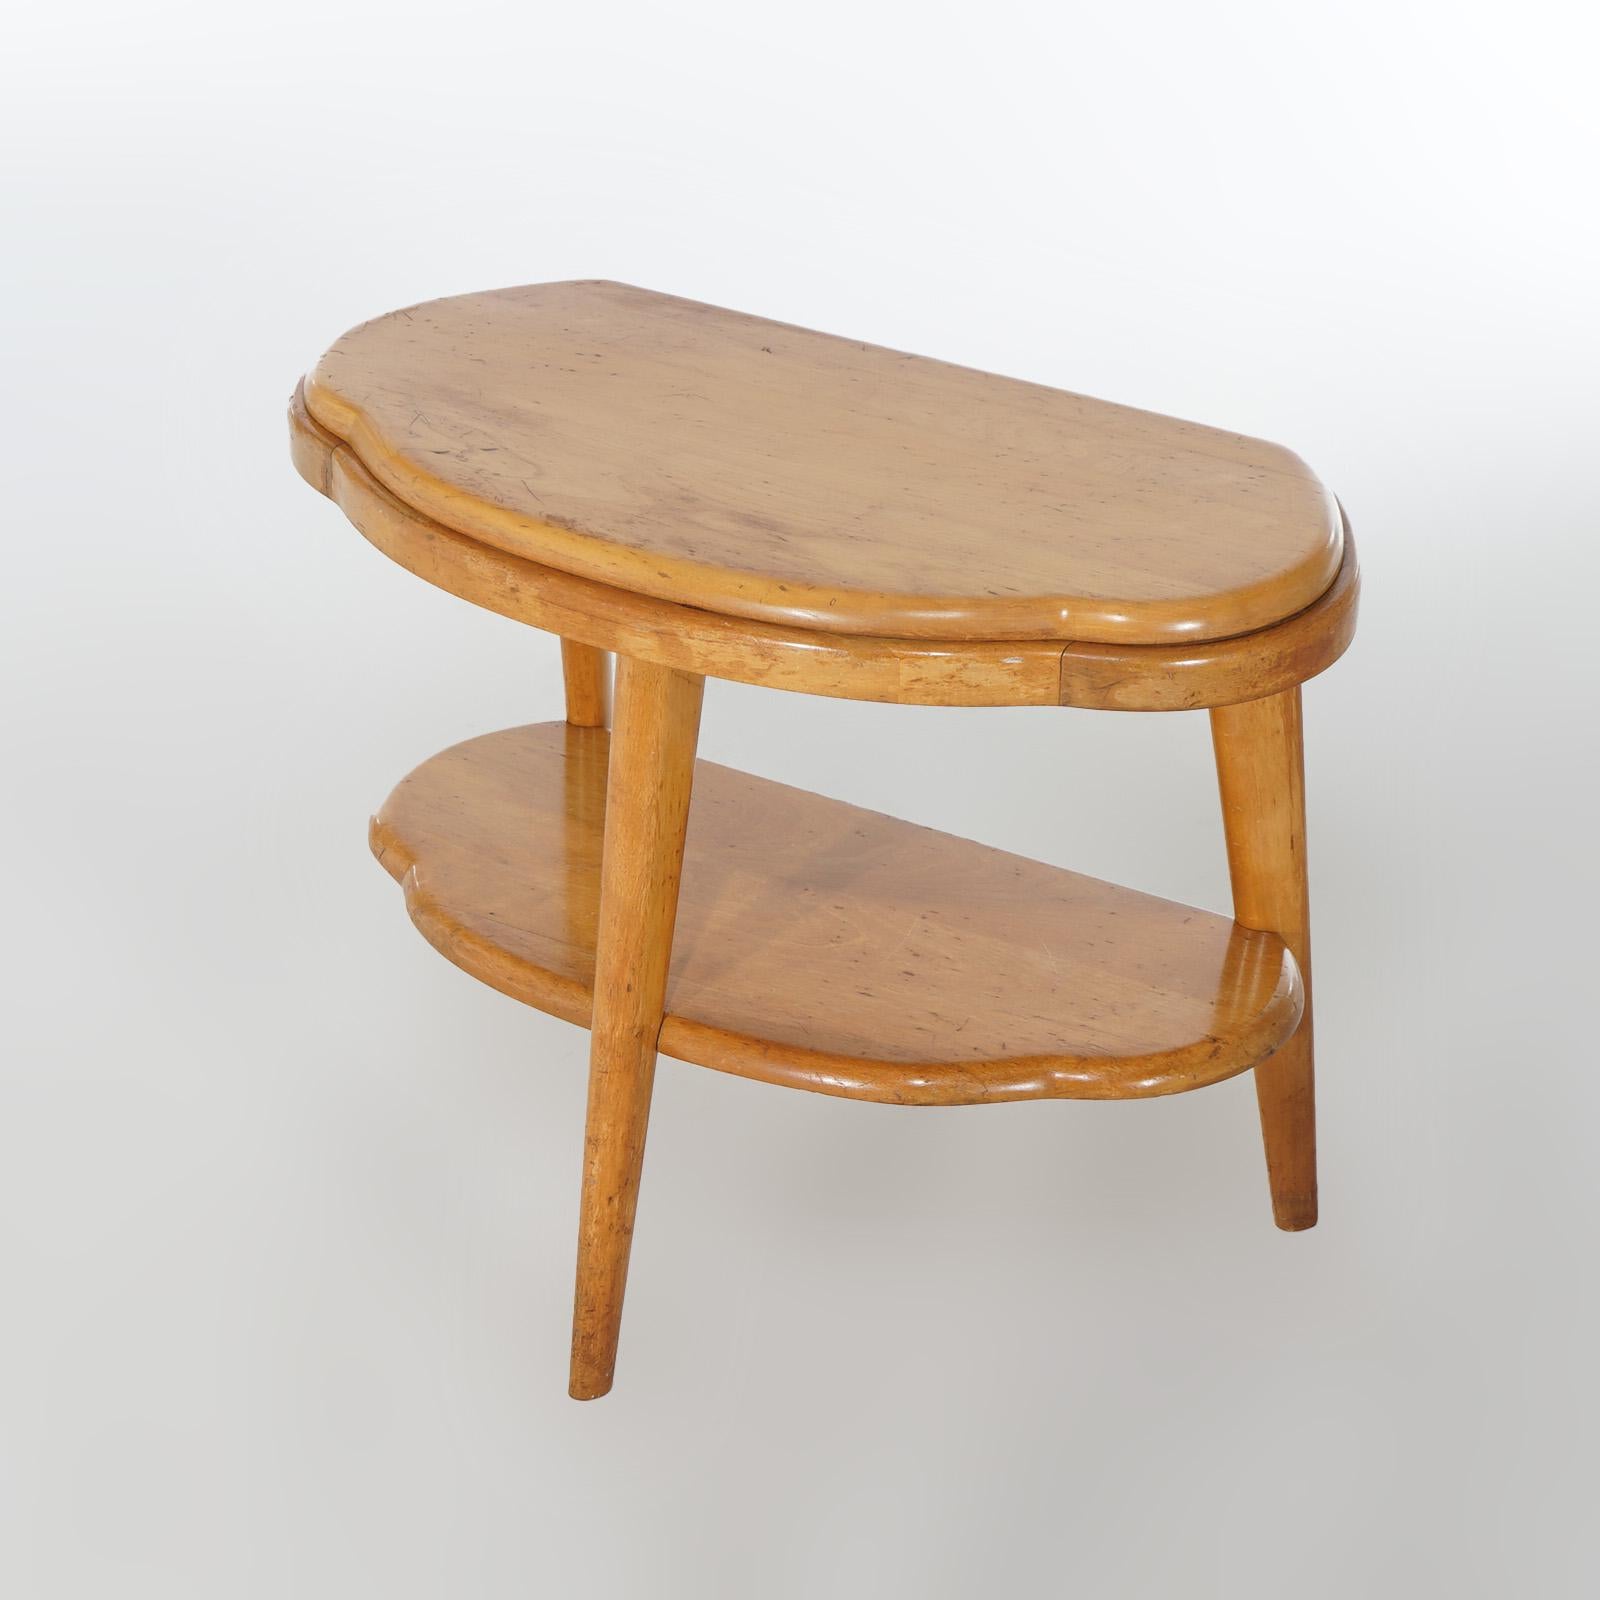 A Mid Century Modern side stand by Heywood Wakefield offers birch construction in stylized demilune form with turned and slightly splayed legs with lower display shelf; Champagne finish; c1950

Measures- 21.25''H x 27.25''W x 16.5''D

Catalogue